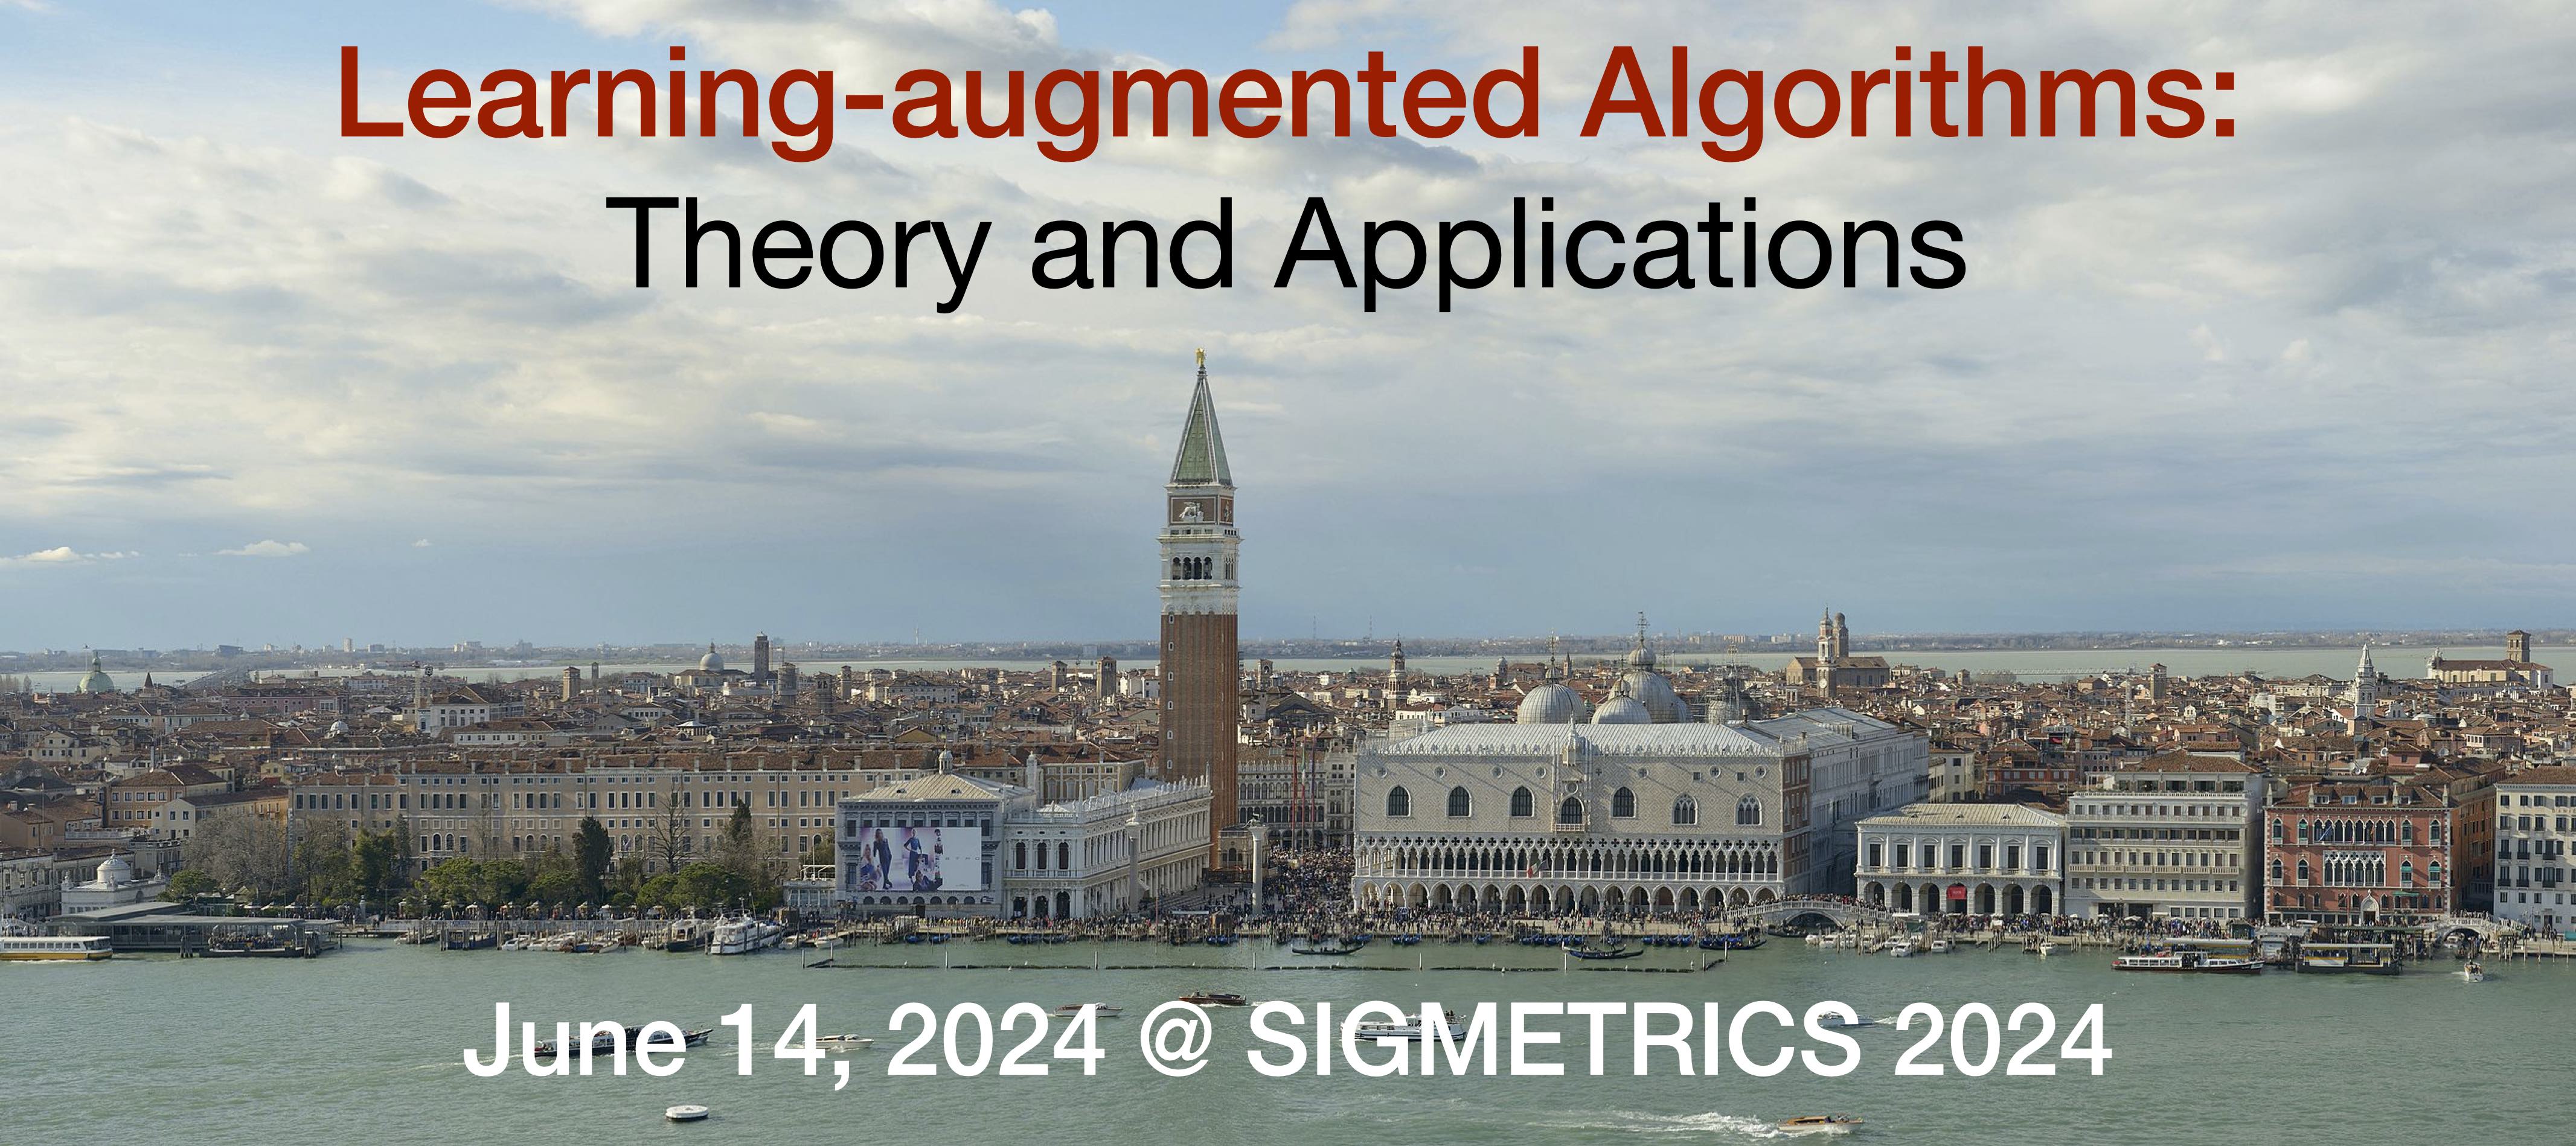 Learning-augmented Algorithms: Theory and Applications (LATA)